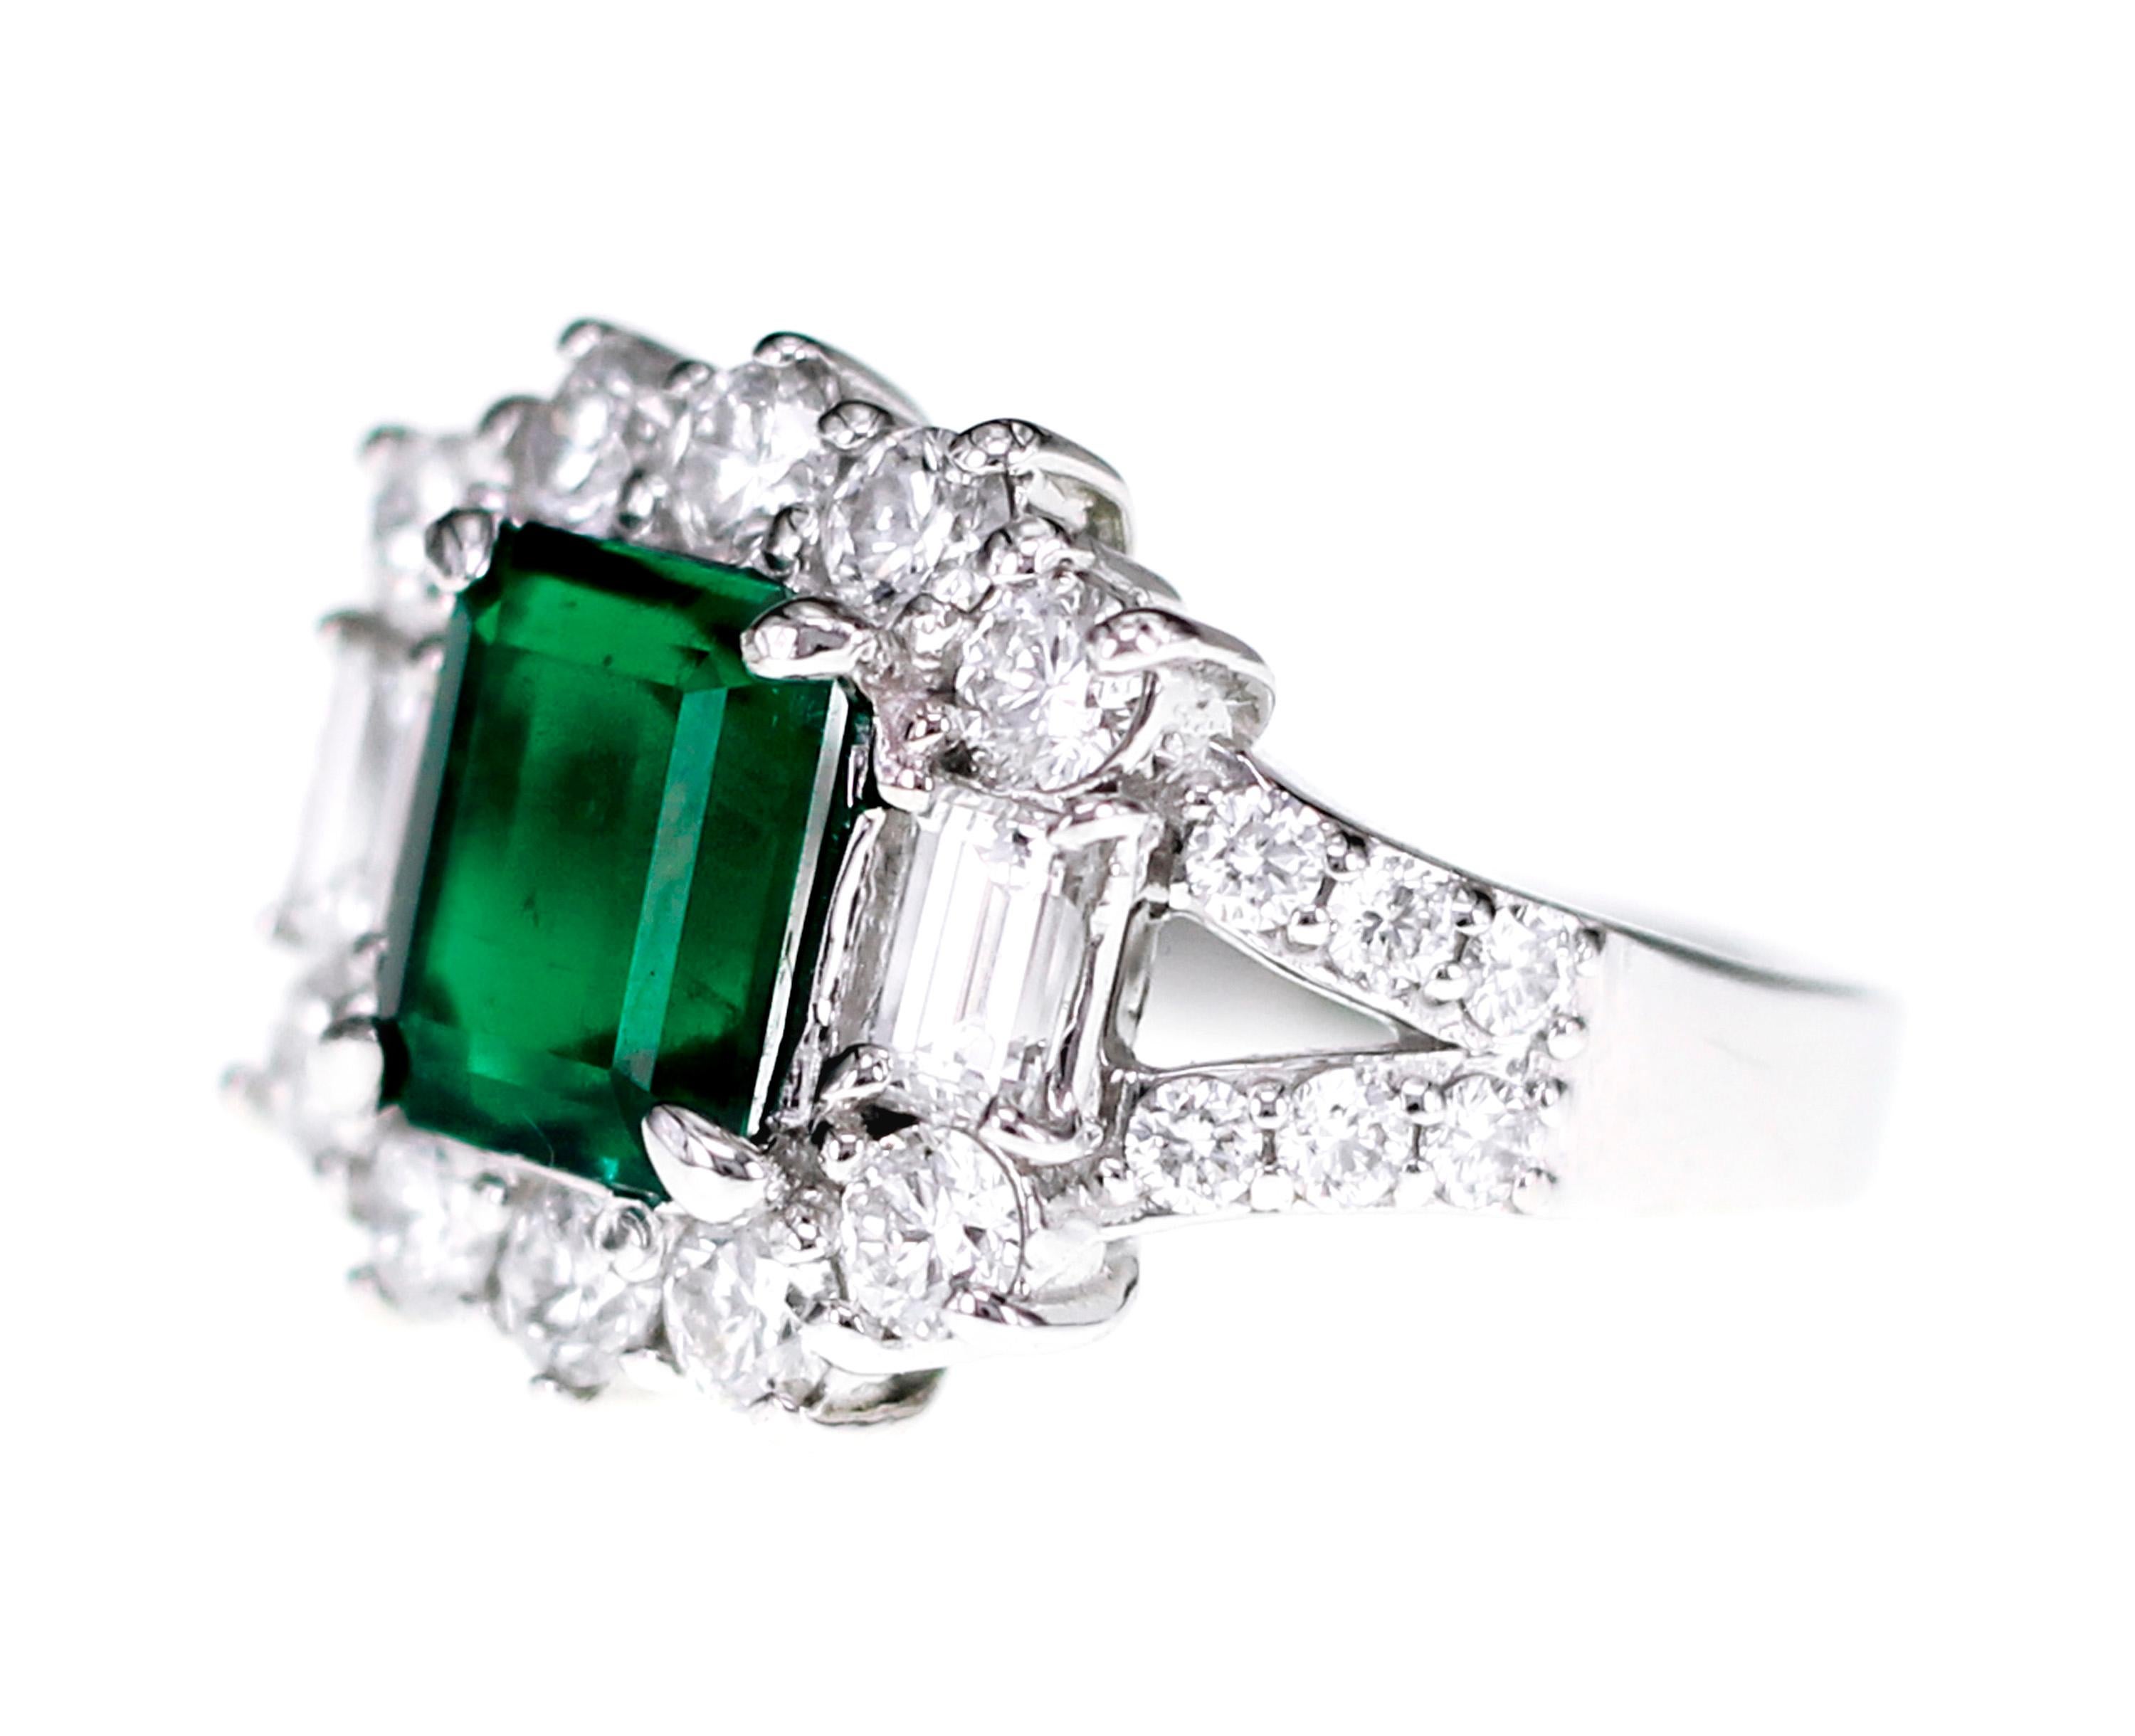 Made in Platinum, this ring consists of 1.99 carat of Vivid Green Colombian Emerald and 1.76 carat of D color VVS quality white brilliant diamonds. The ring has a special certificate of MUZO color. This vividly saturated emerald of 1.99 carats is